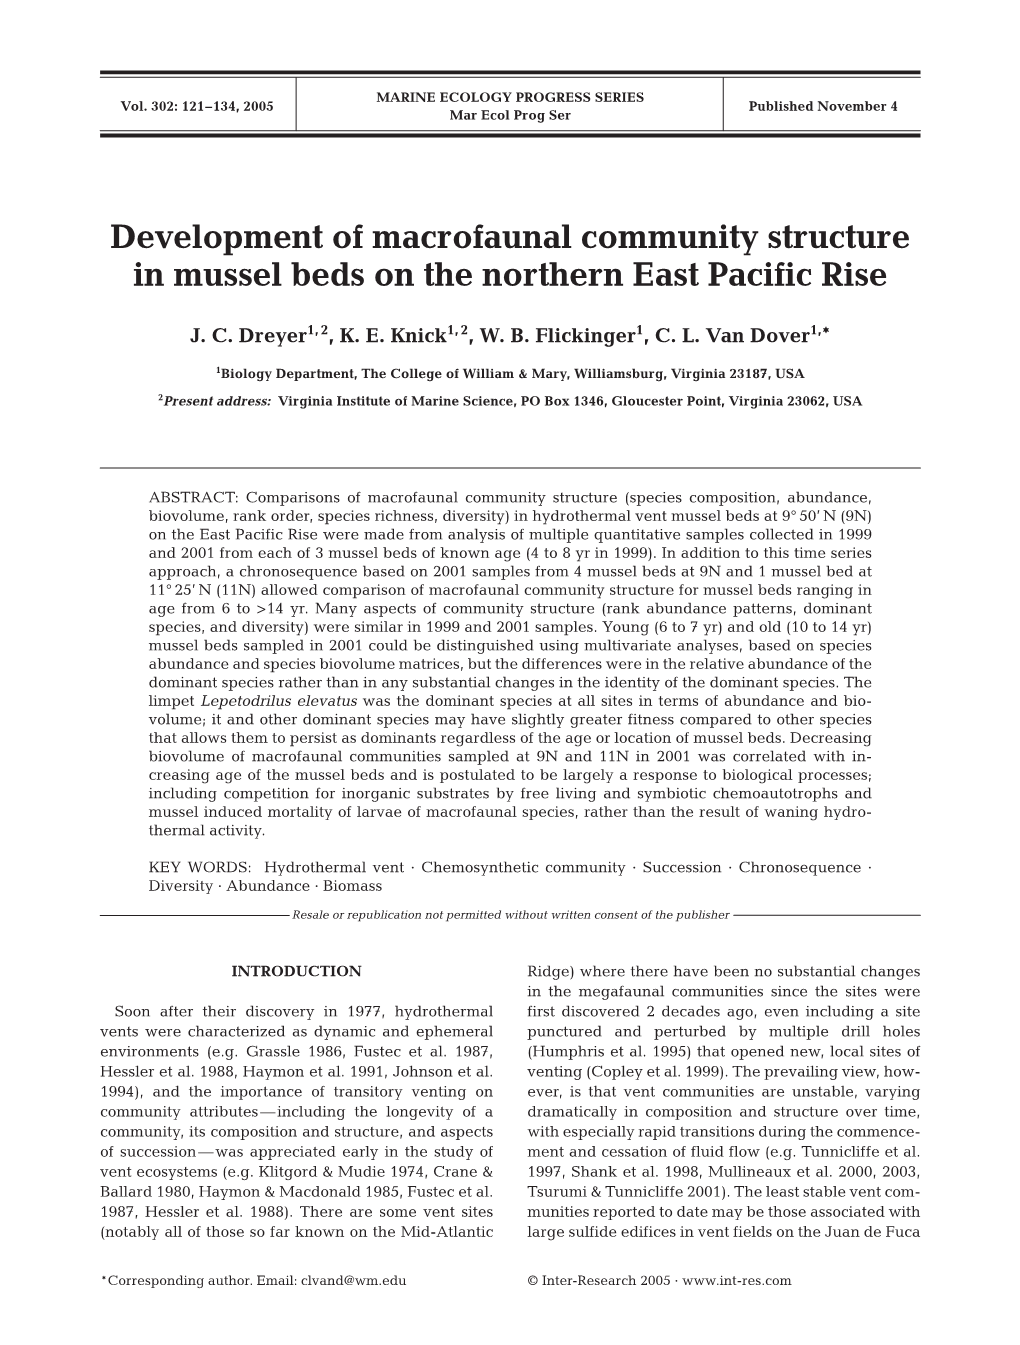 Development of Macrofaunal Community Structure in Mussel Beds on the Northern East Pacific Rise